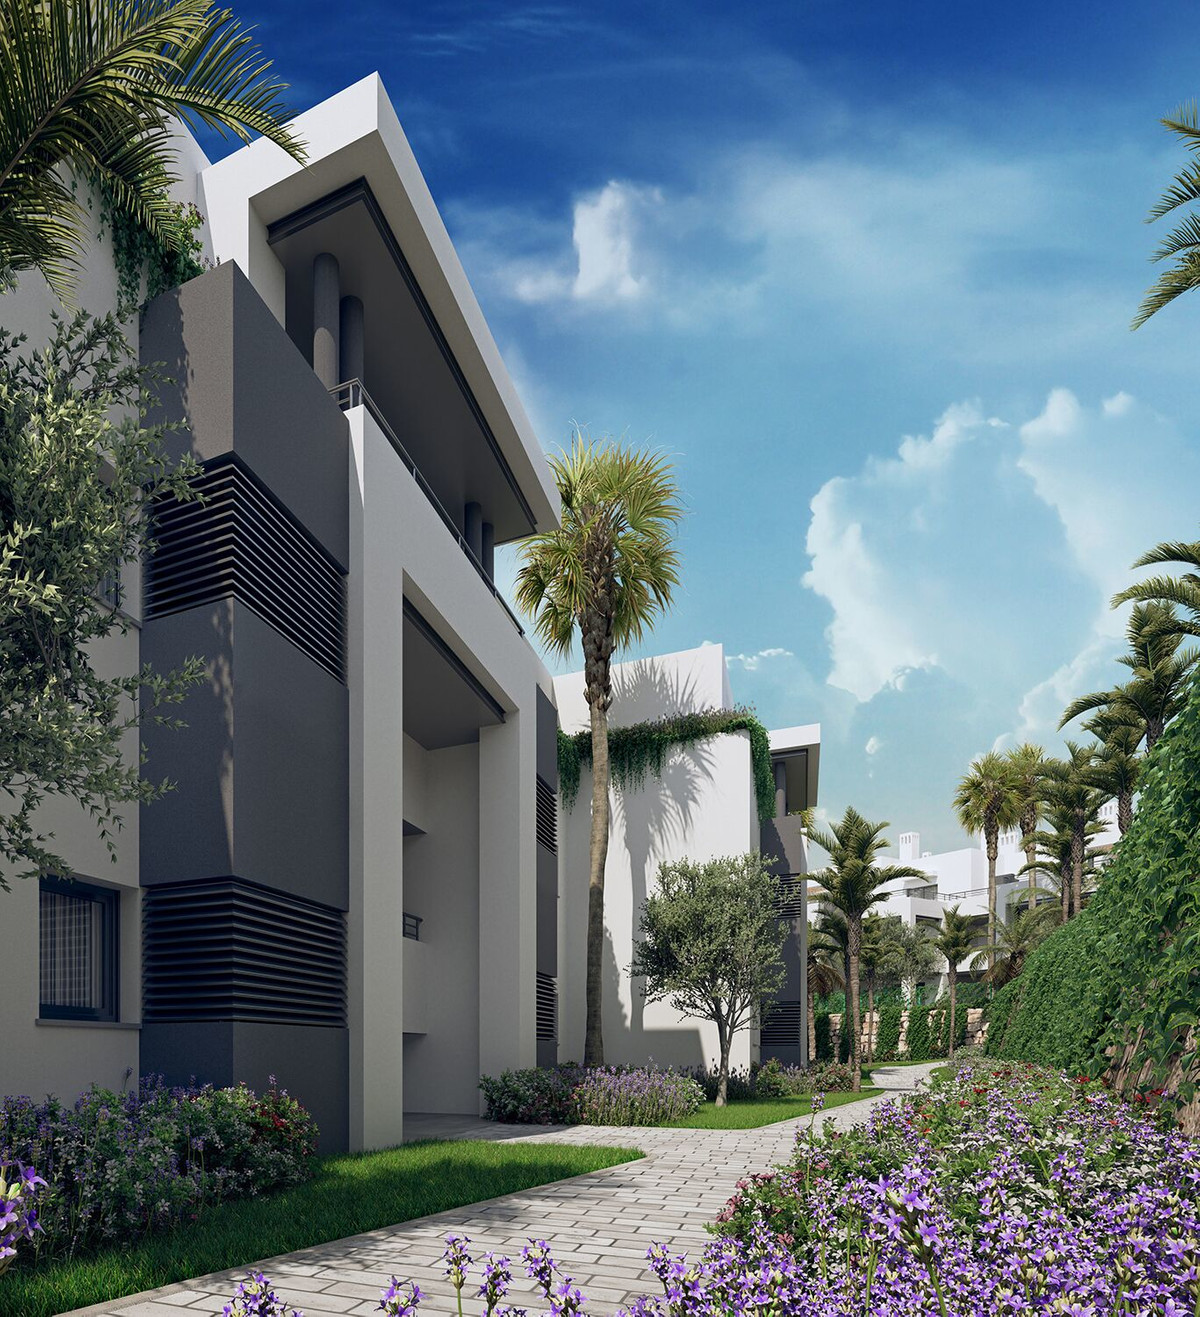 New Development: Prices from € 235,000 to € 305,000. [Beds: 2 - 2] [Baths: 2 - 3] [Built size: 86.00 m2 - 109.00 m2]